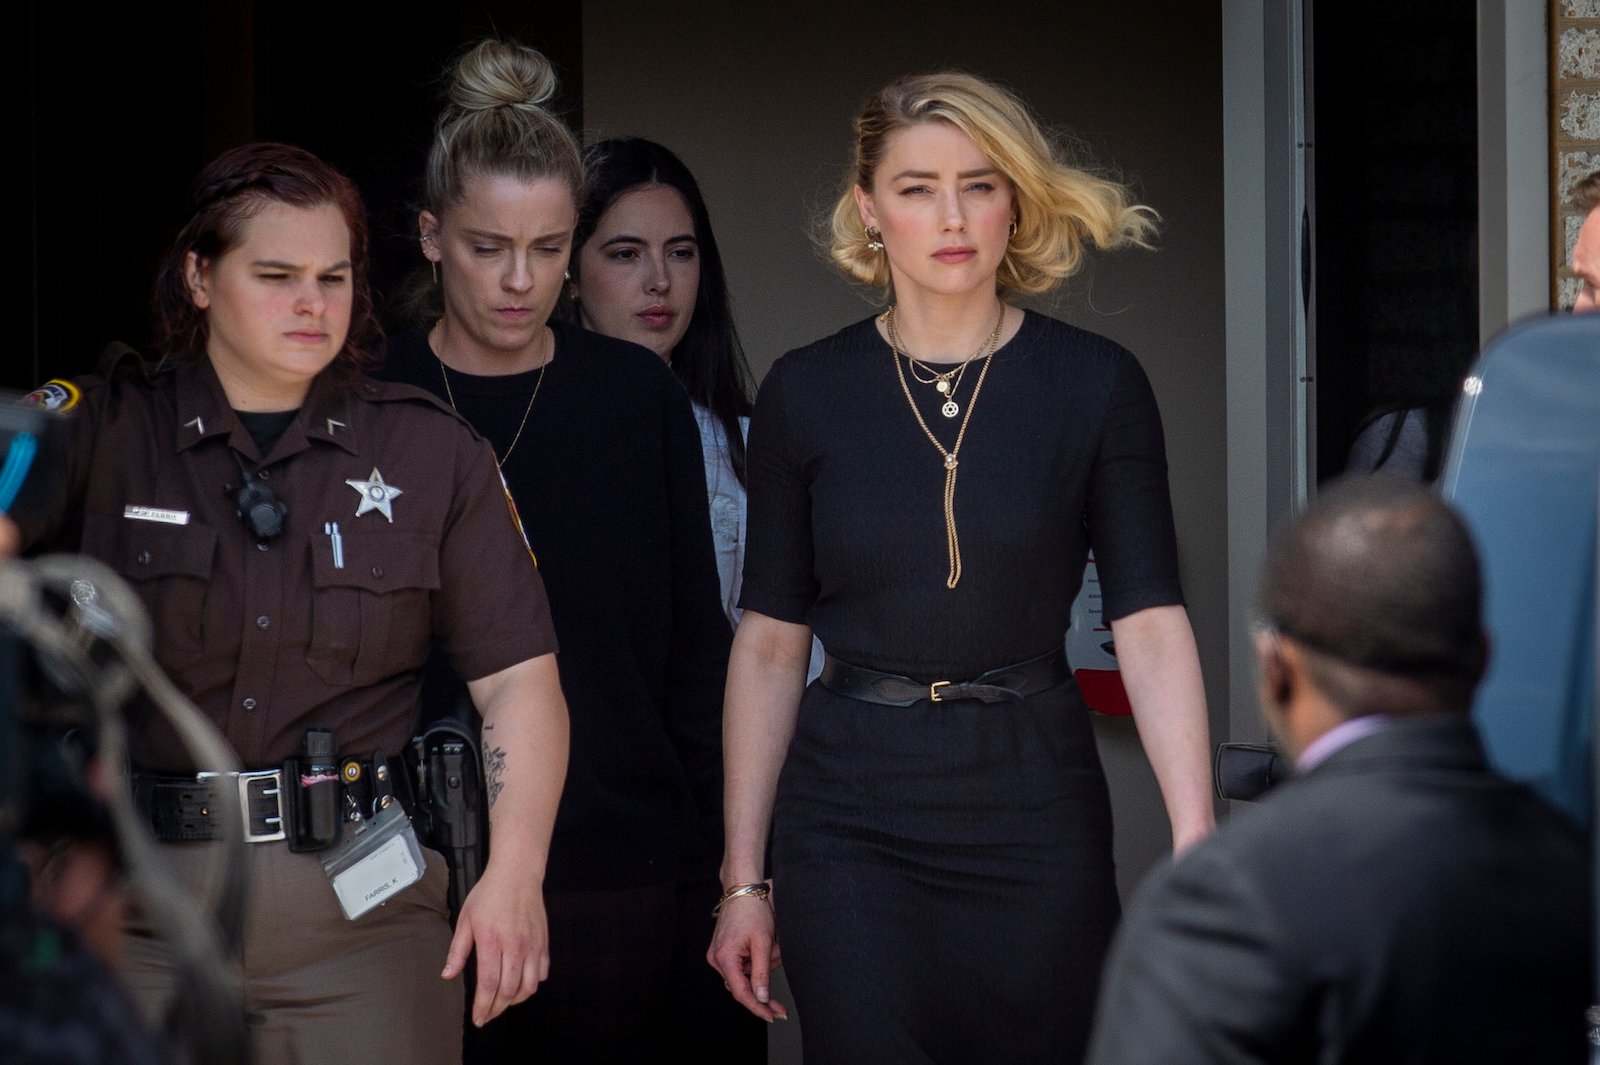 Amber Heard walking with her sister out of the courtroom after the trial against Johnny Depp